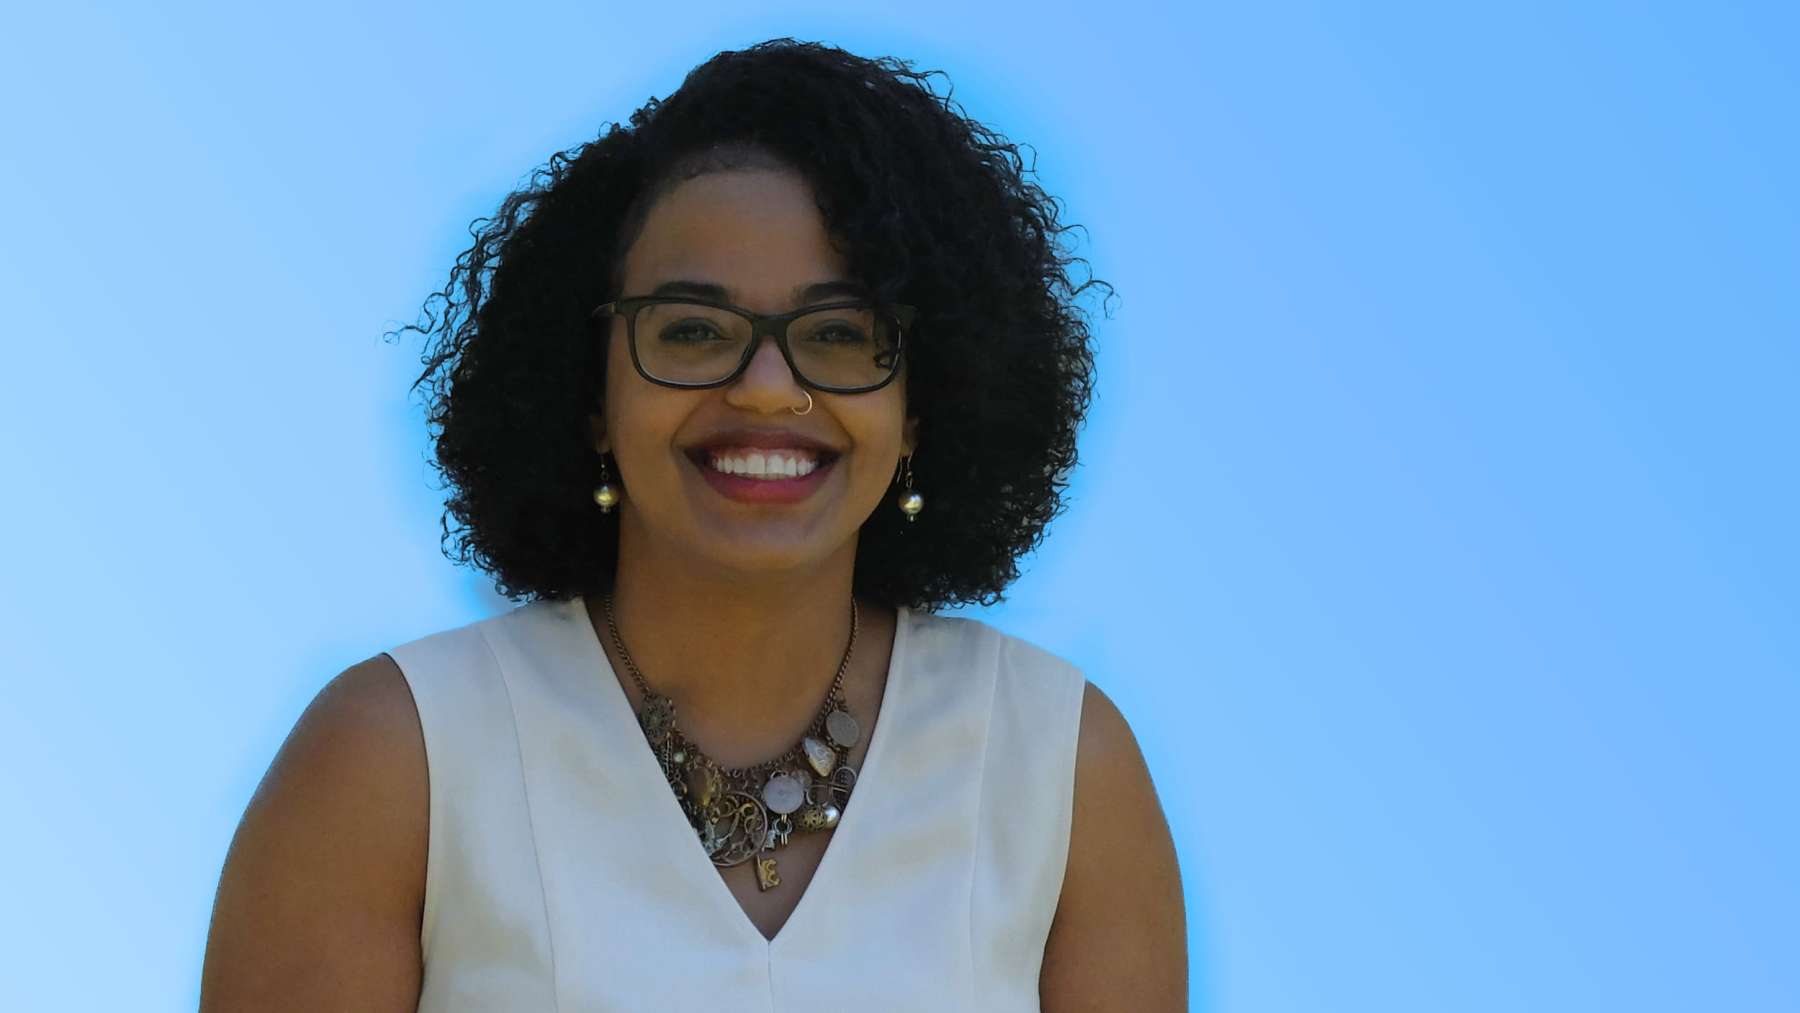 Rhode Island News: State Representative Leonela Felix selected as one of nation’s outstanding rising leaders